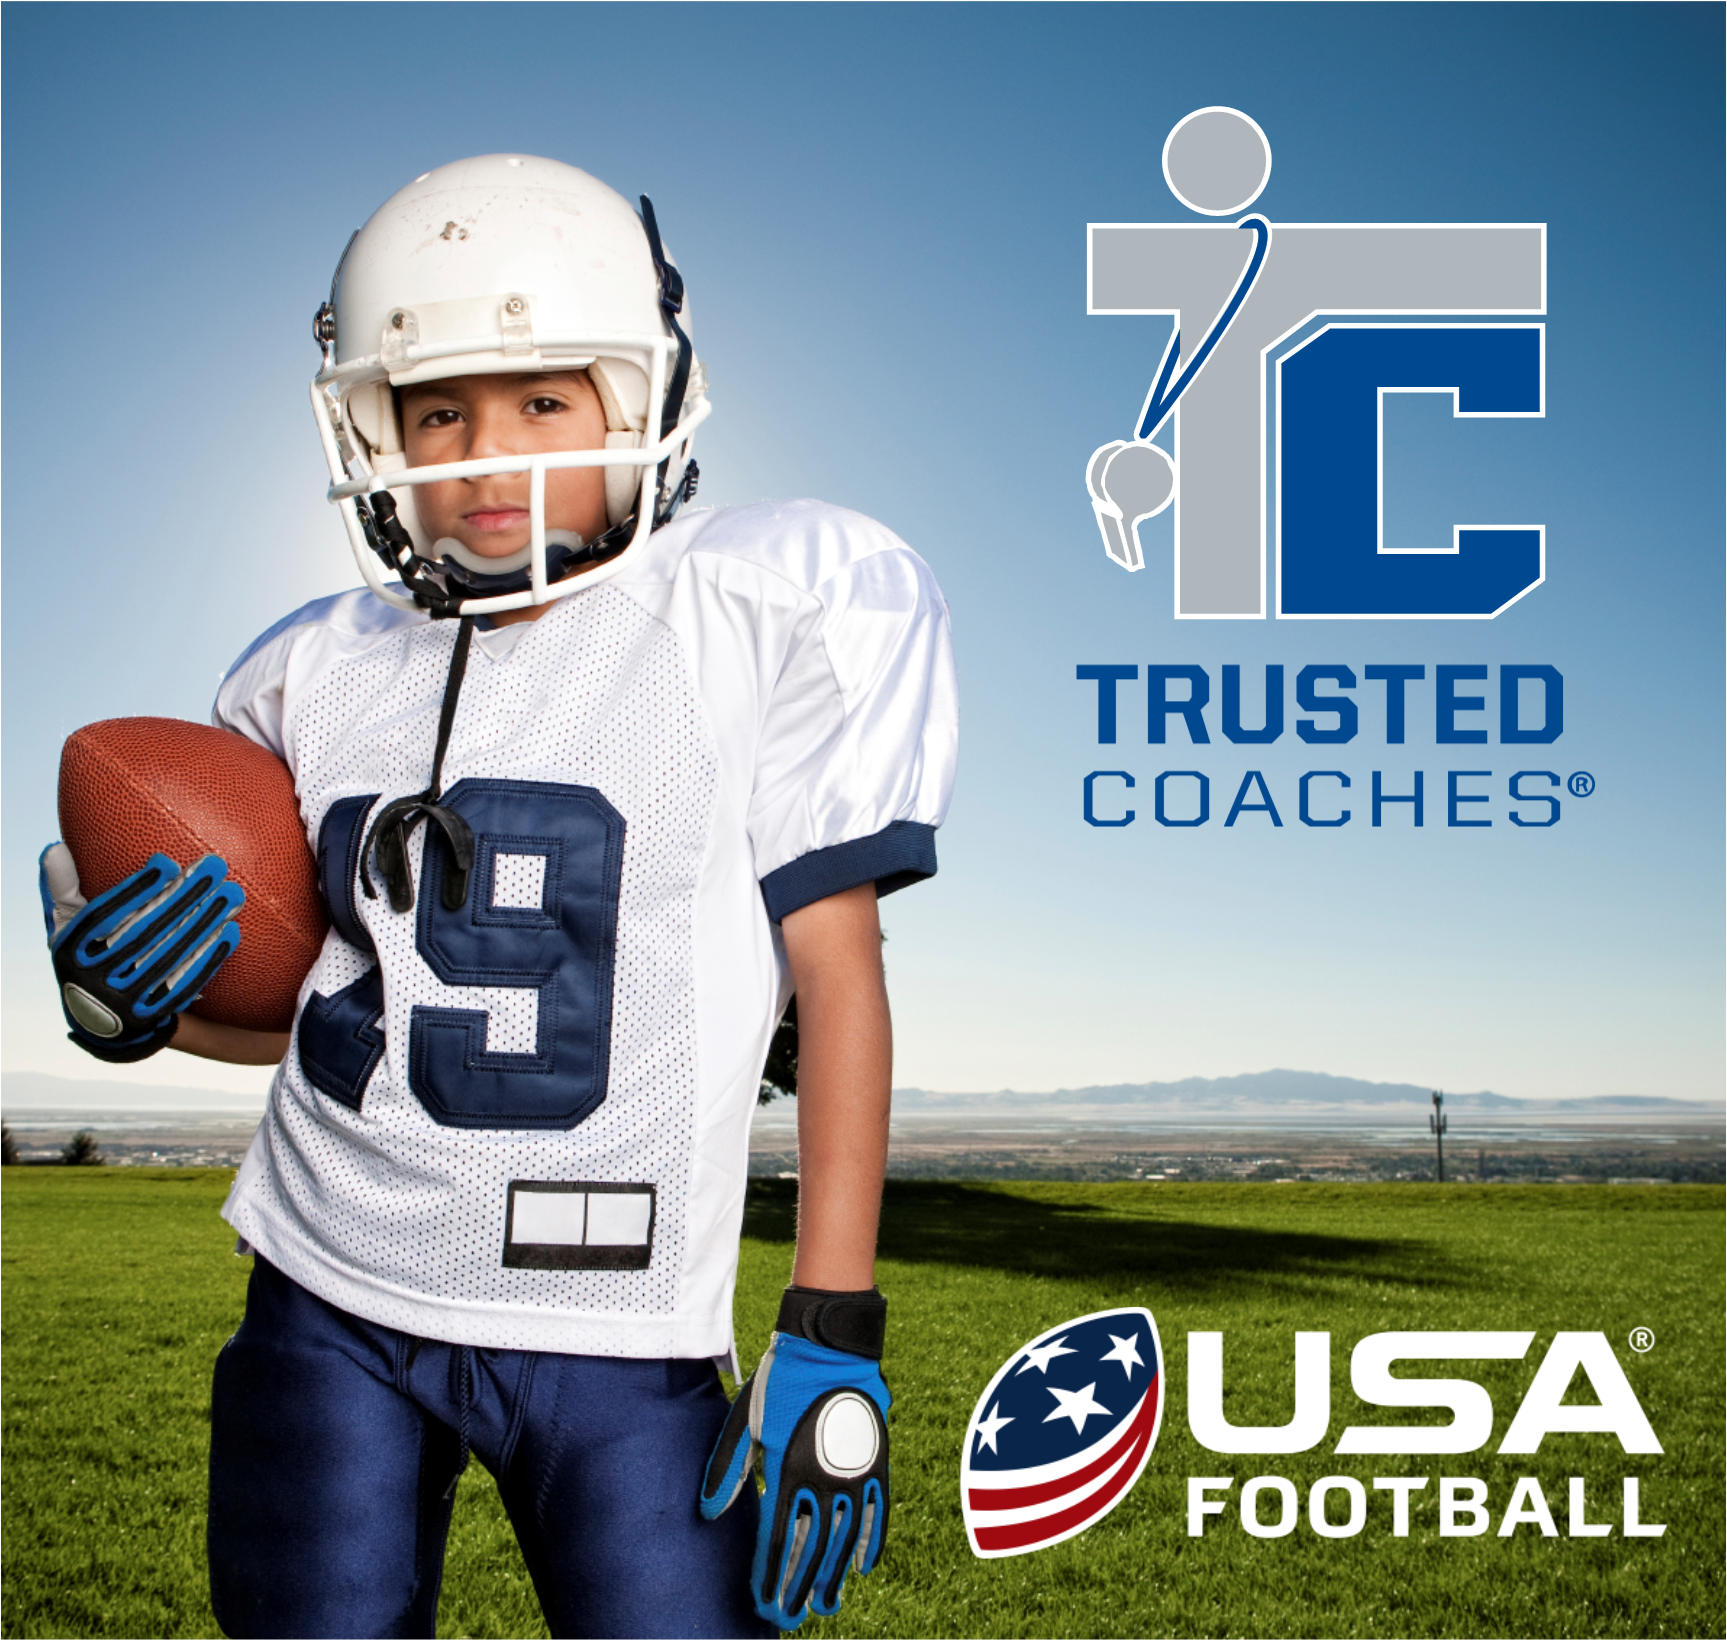 Trusted Coaches and USA Football Team Up to create a "One-Stop Shop"